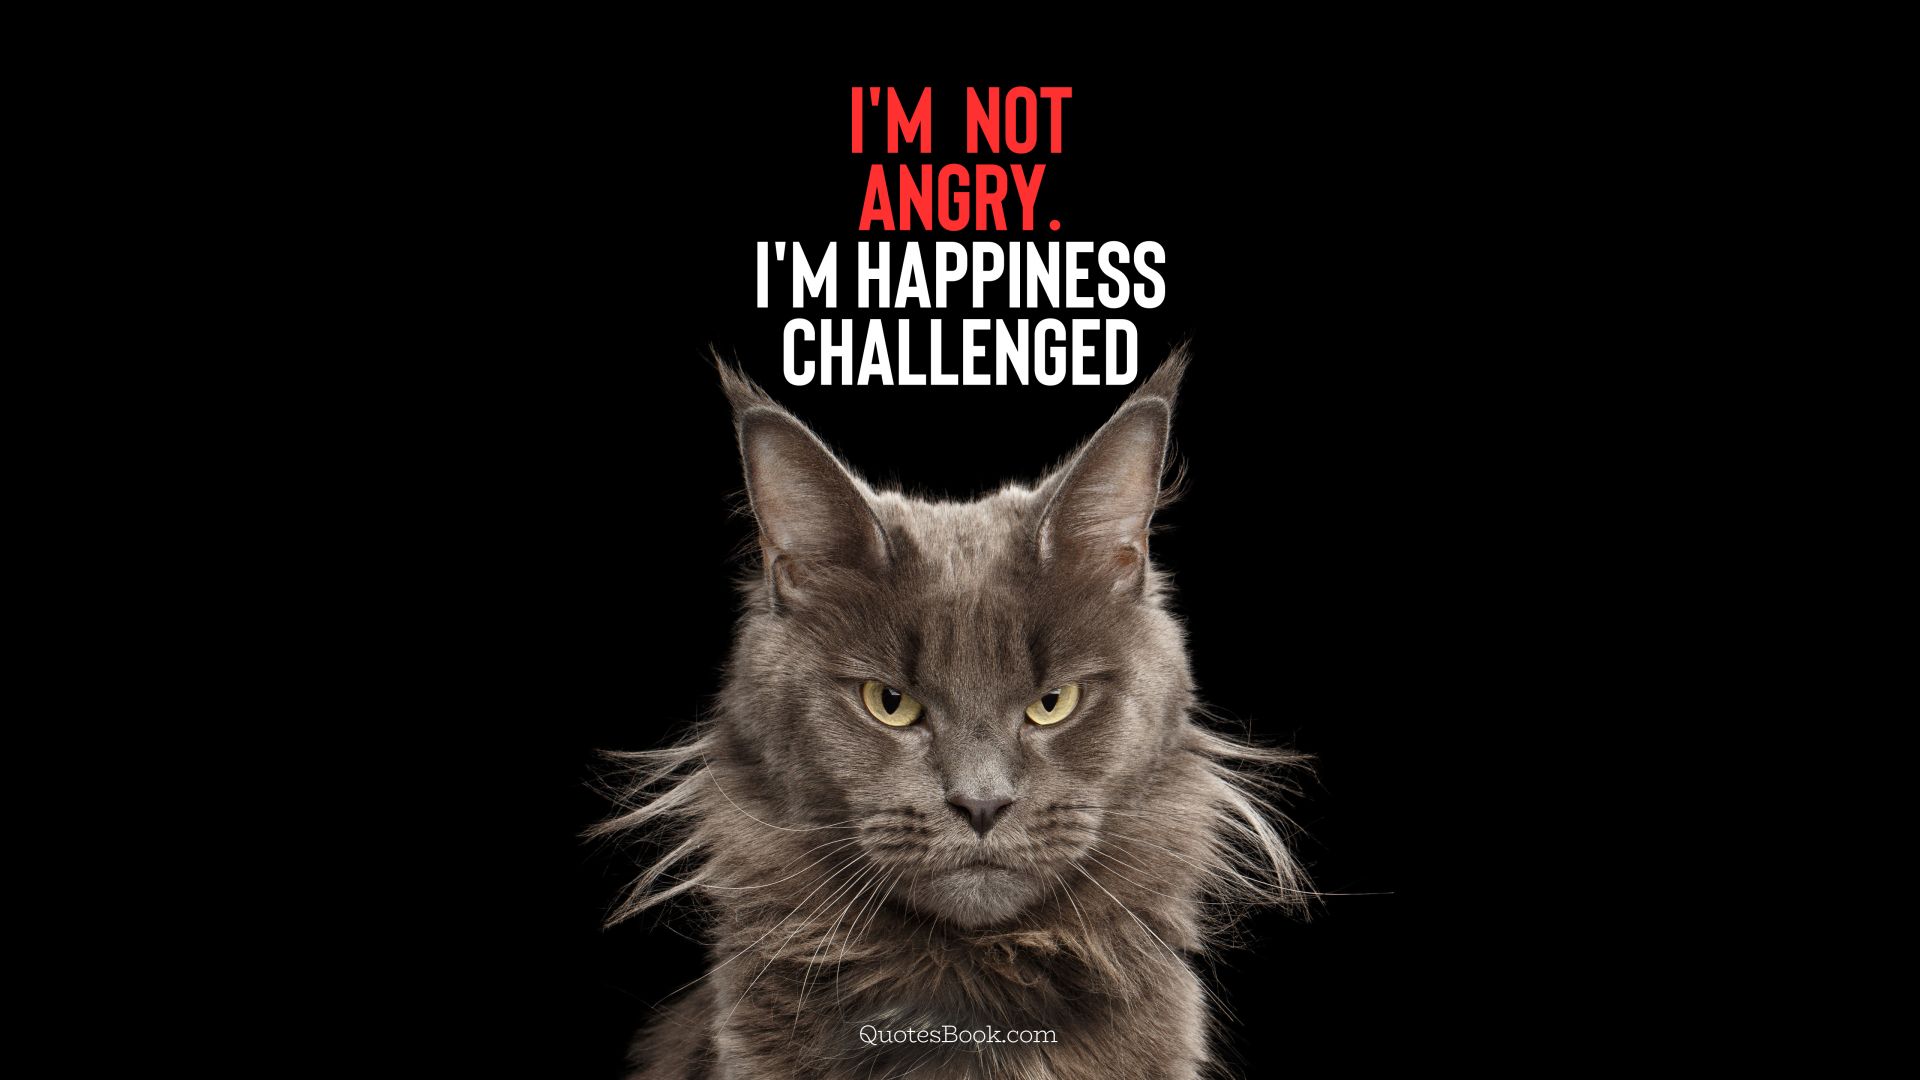 I'm not angry. I'm happiness challenged